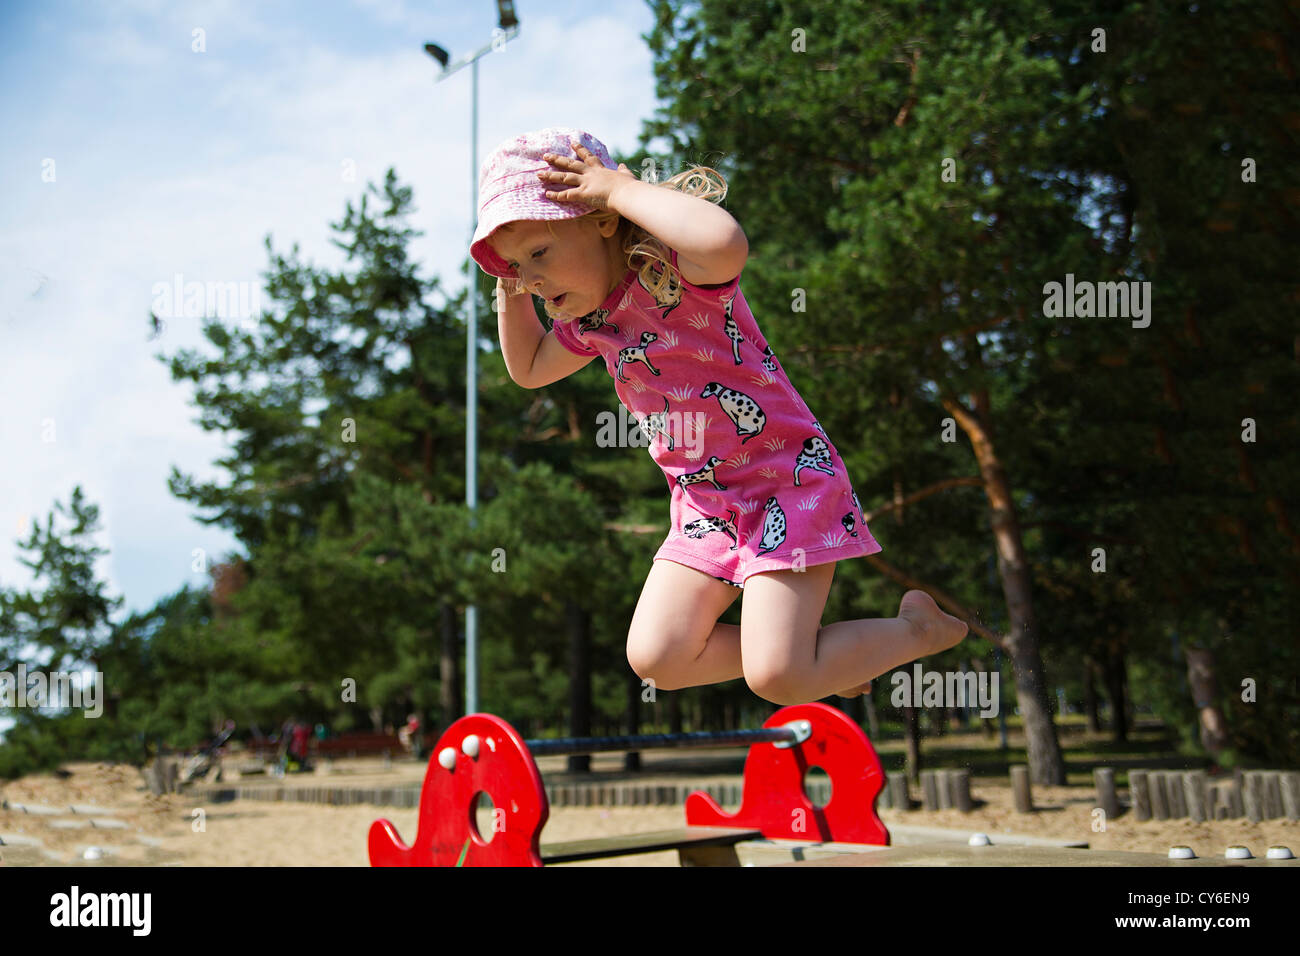 Girl captured on camera while jumping on trampoline Stock Photo